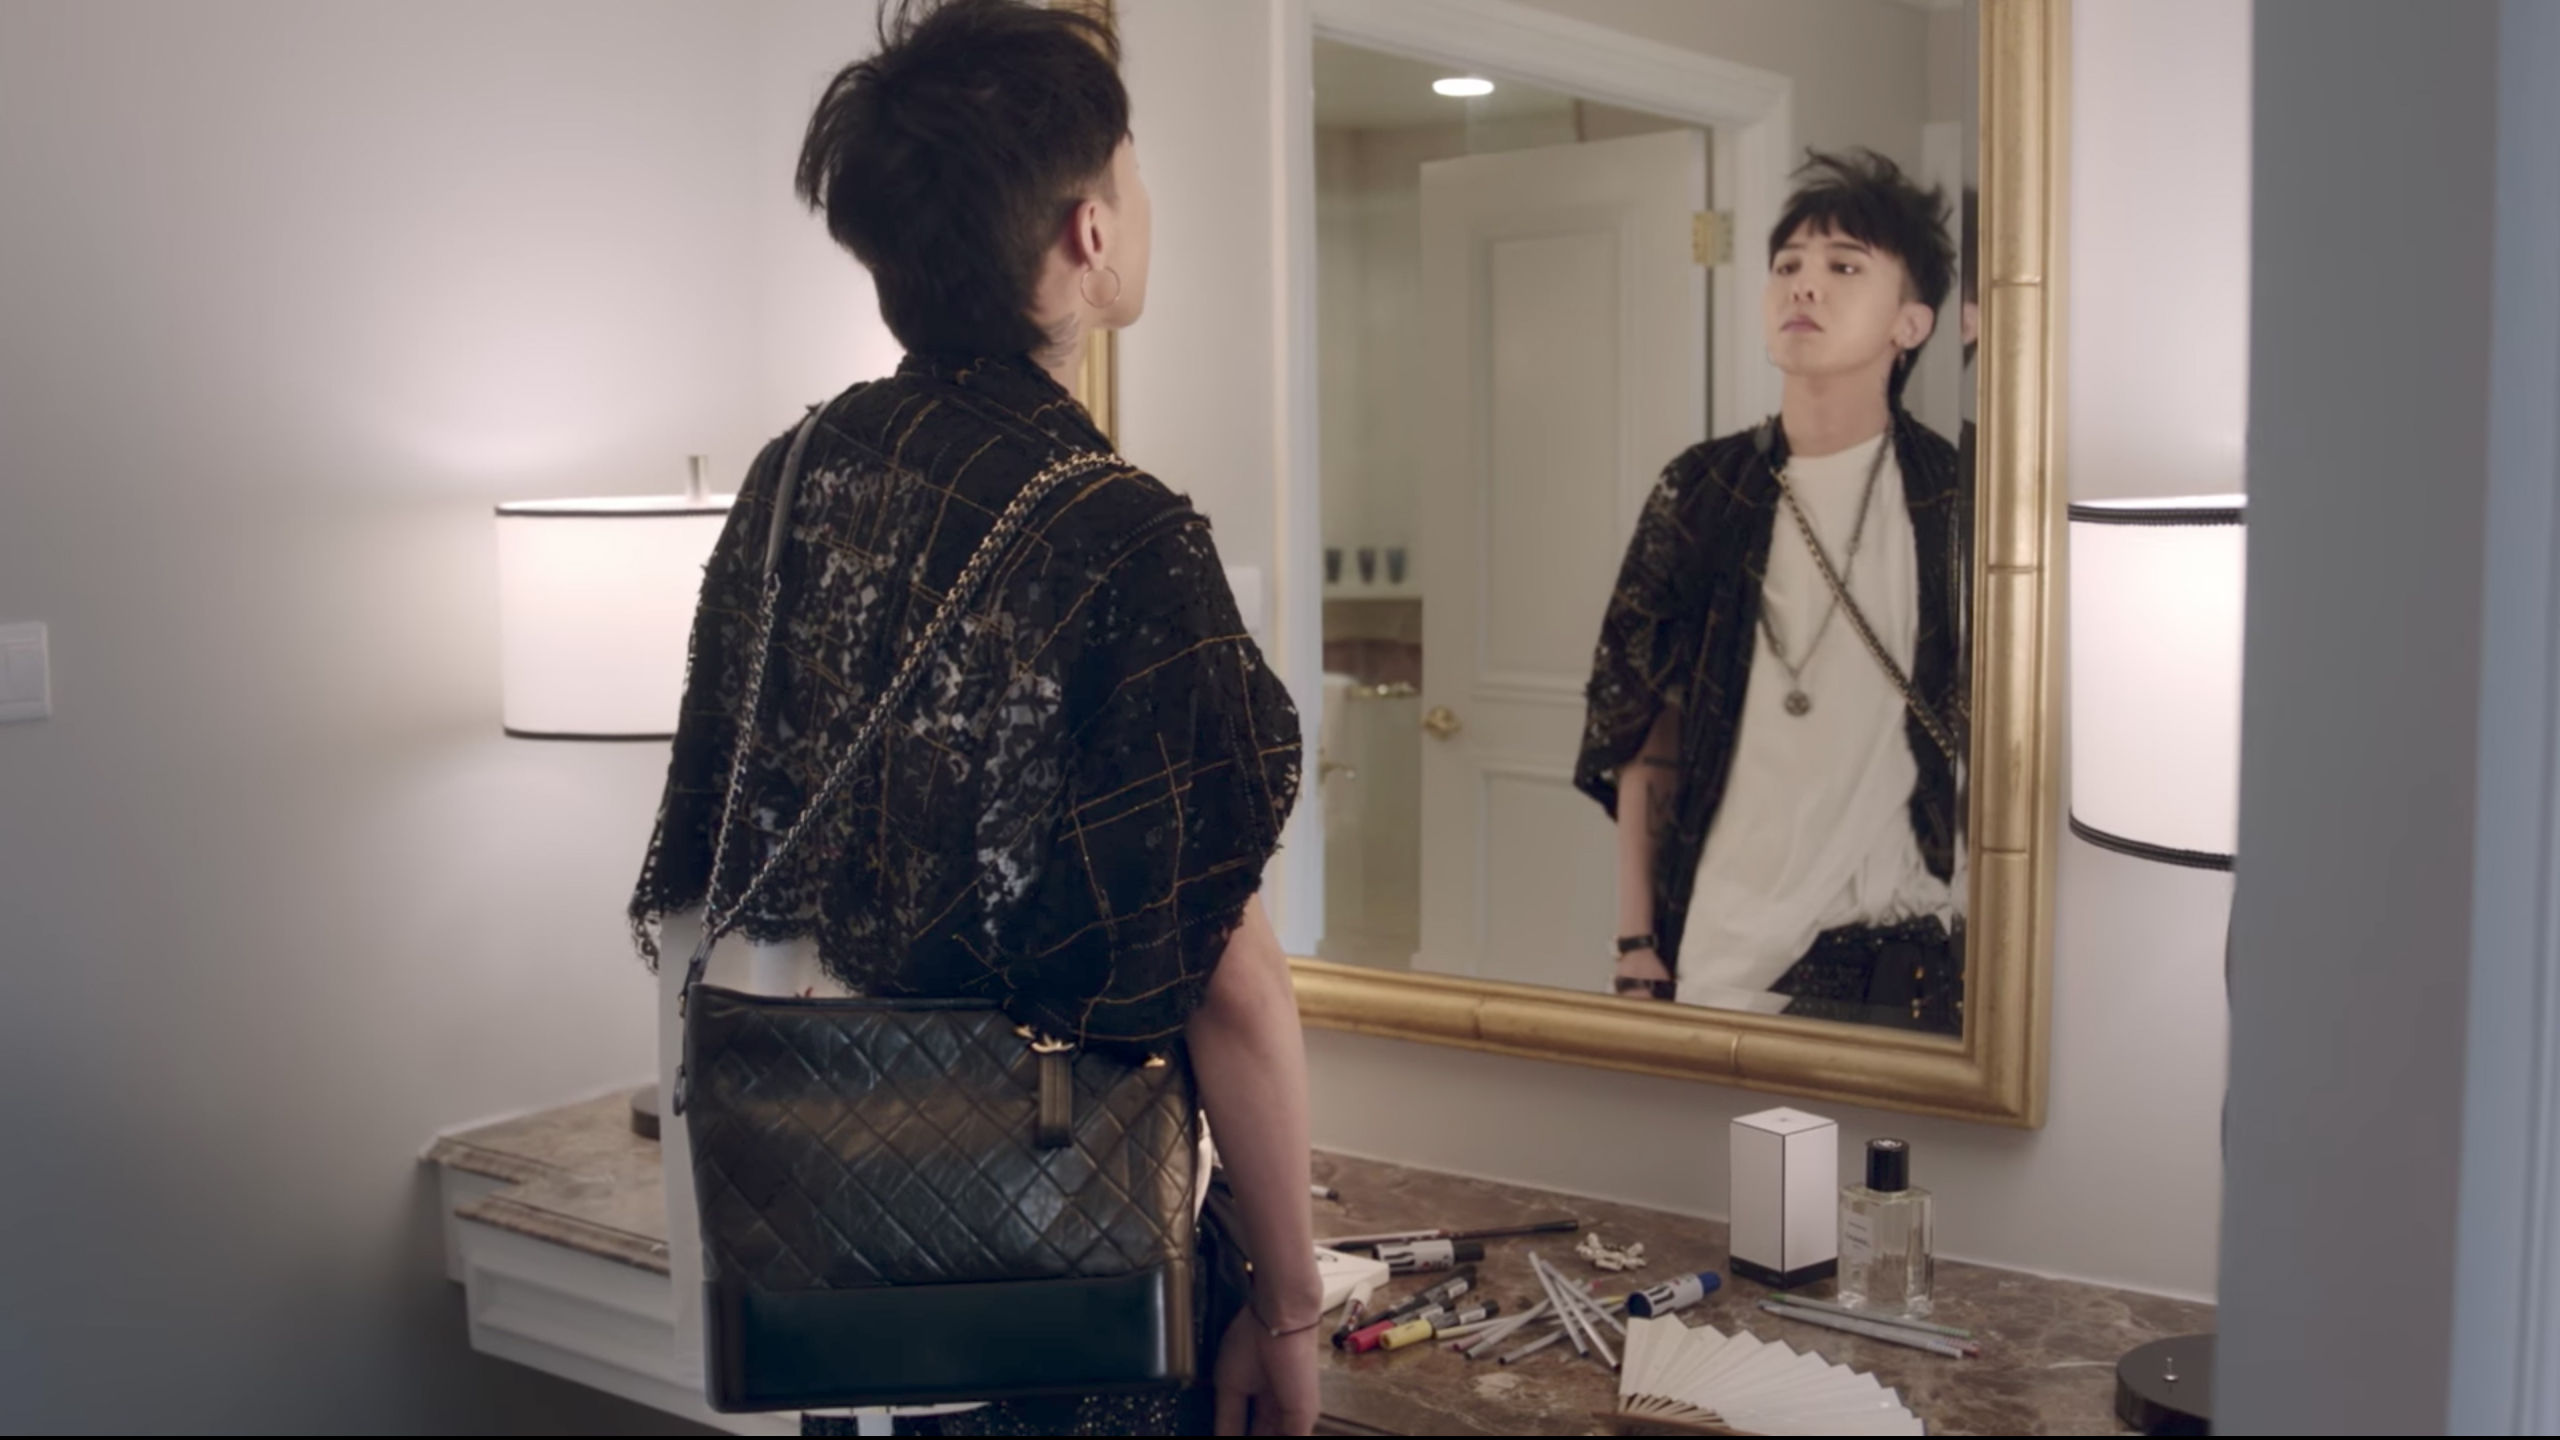 Watch G-Dragon prep for his concert in Chanel's new campaign